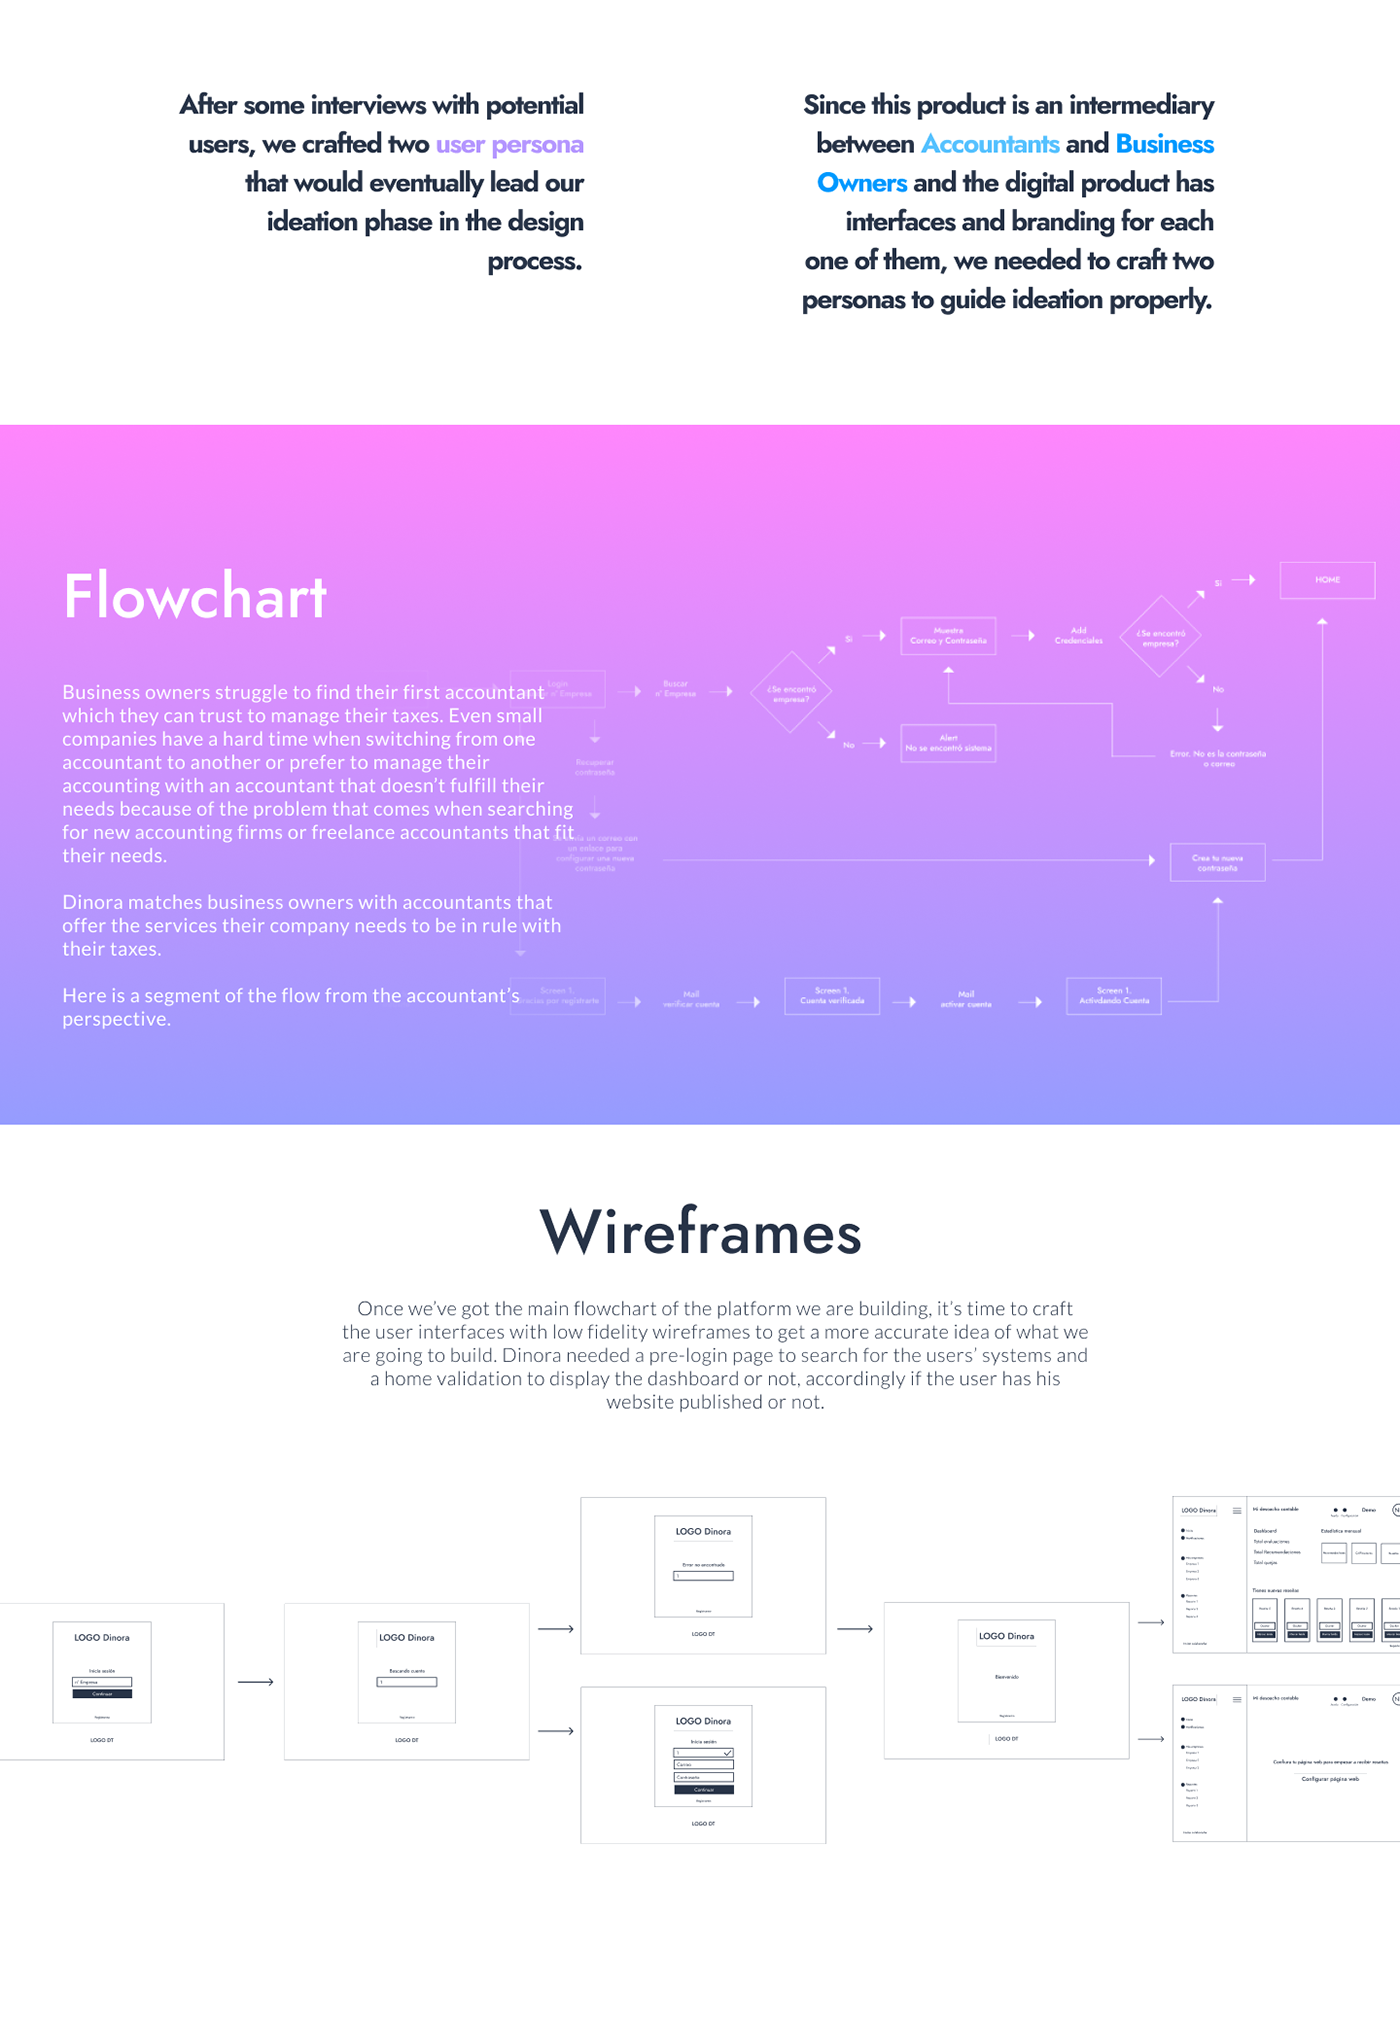 Flowchart and Wireframes